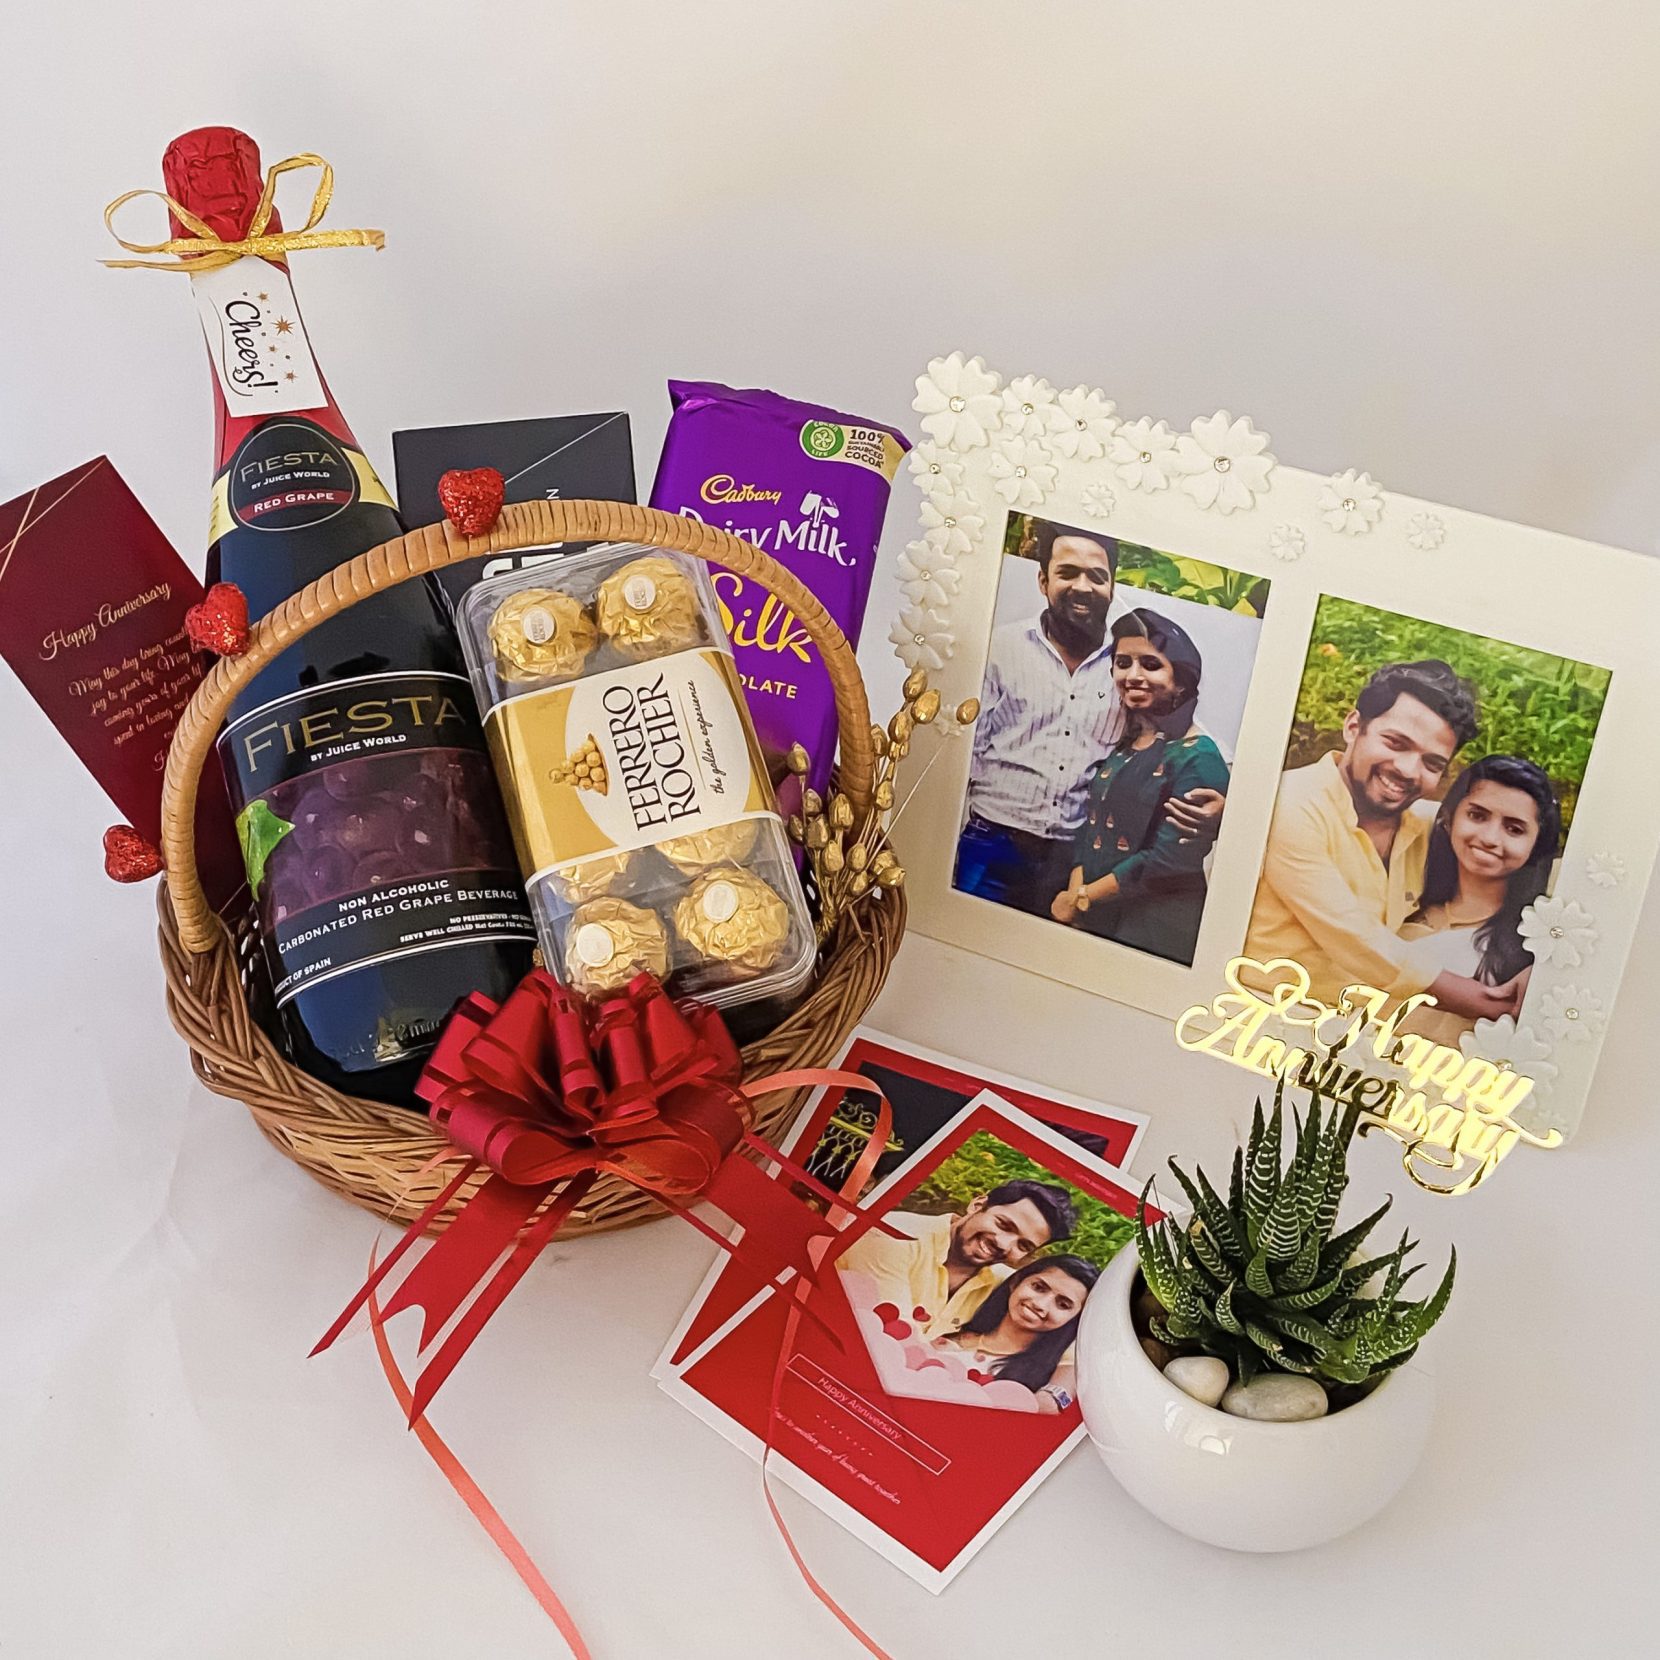 10 Amazing Return Gifts for Your 25th Anniversary Party: Send Guests Home  with a Reminder That Real Love Stories Don't Have Endings (2019)